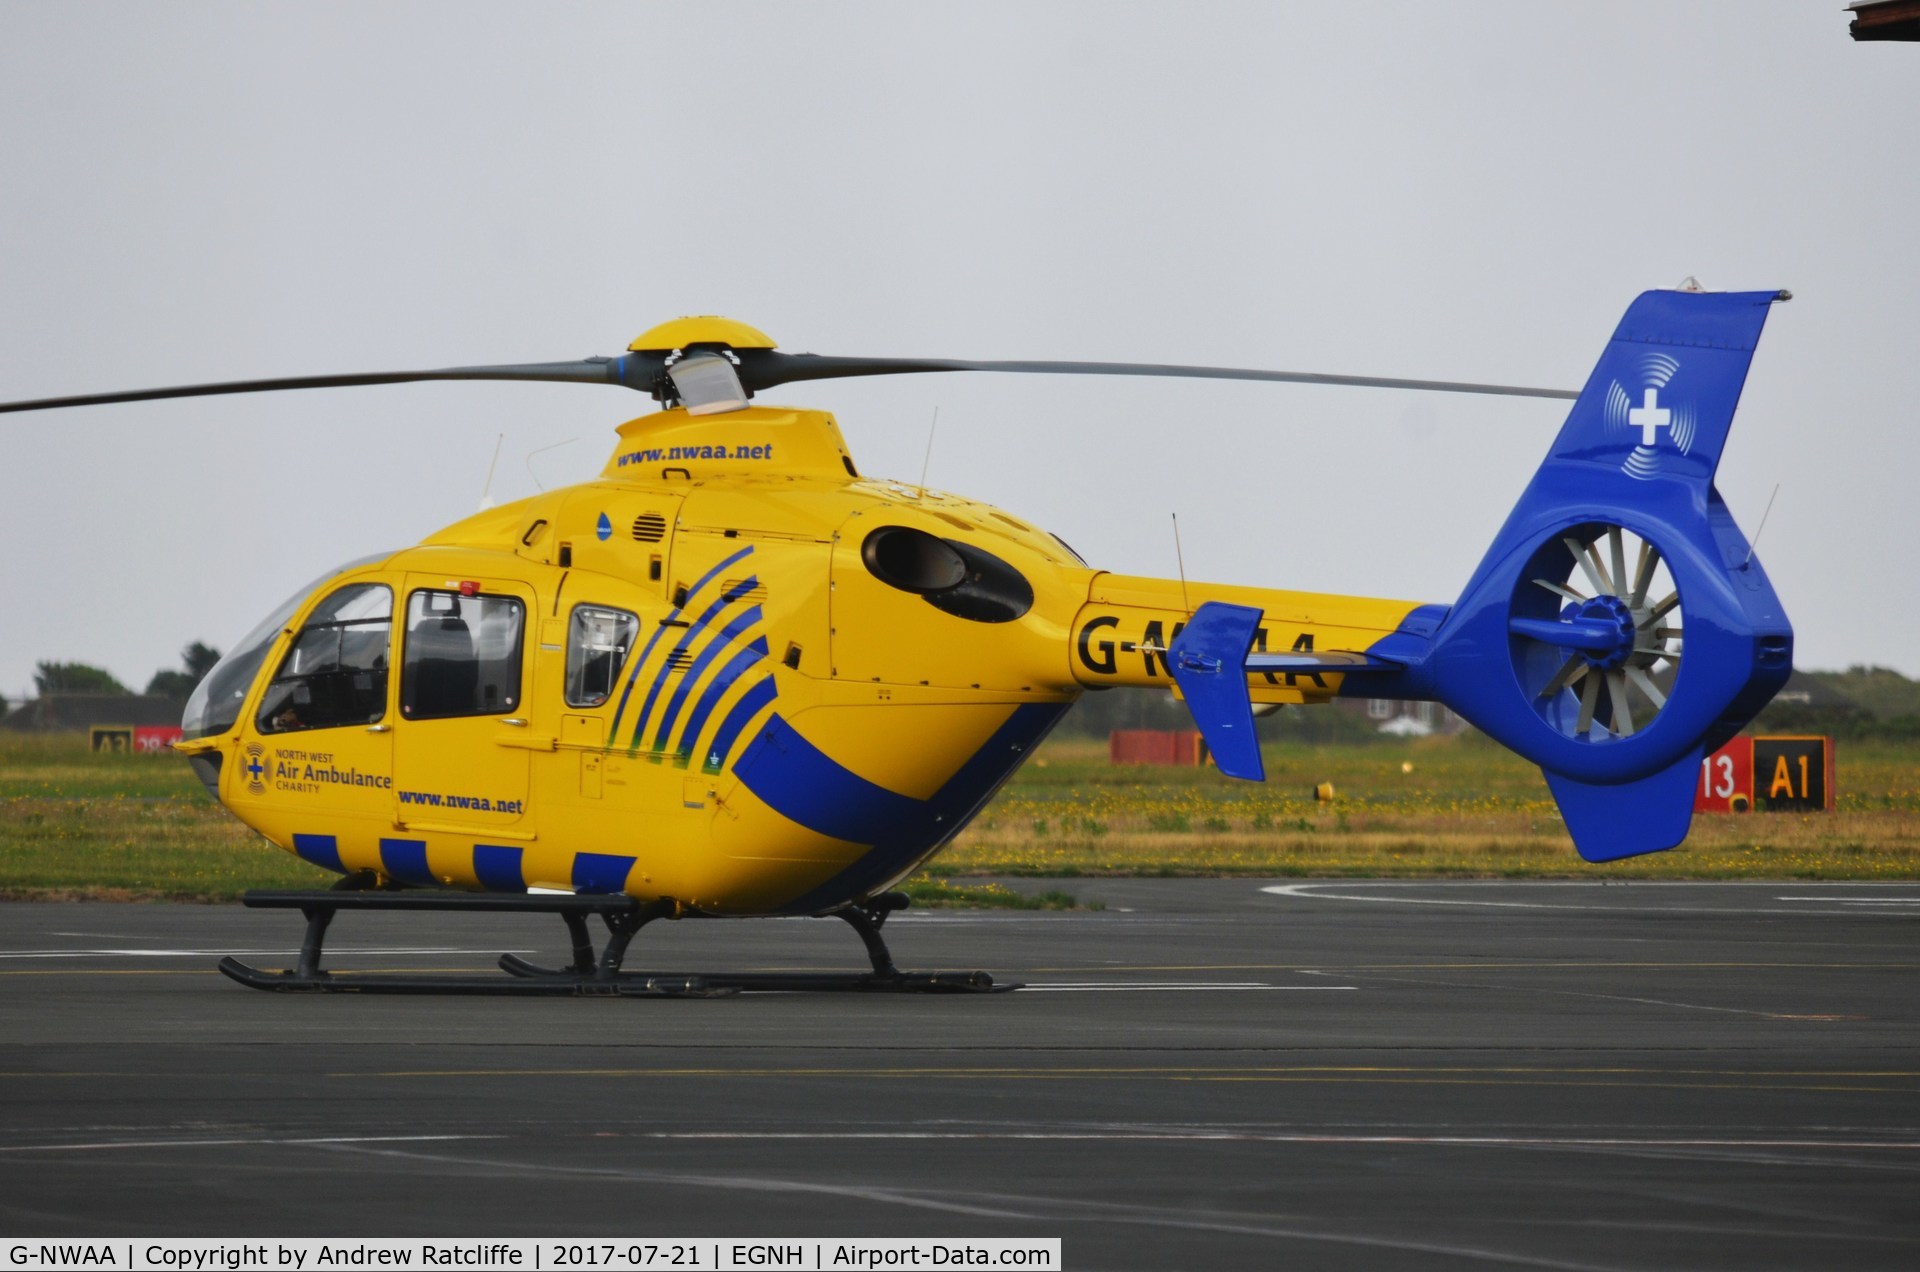 G-NWAA, 2005 Eurocopter EC-135T-2 C/N 0427, North West Air Ambulance parked at Blackpool Airport